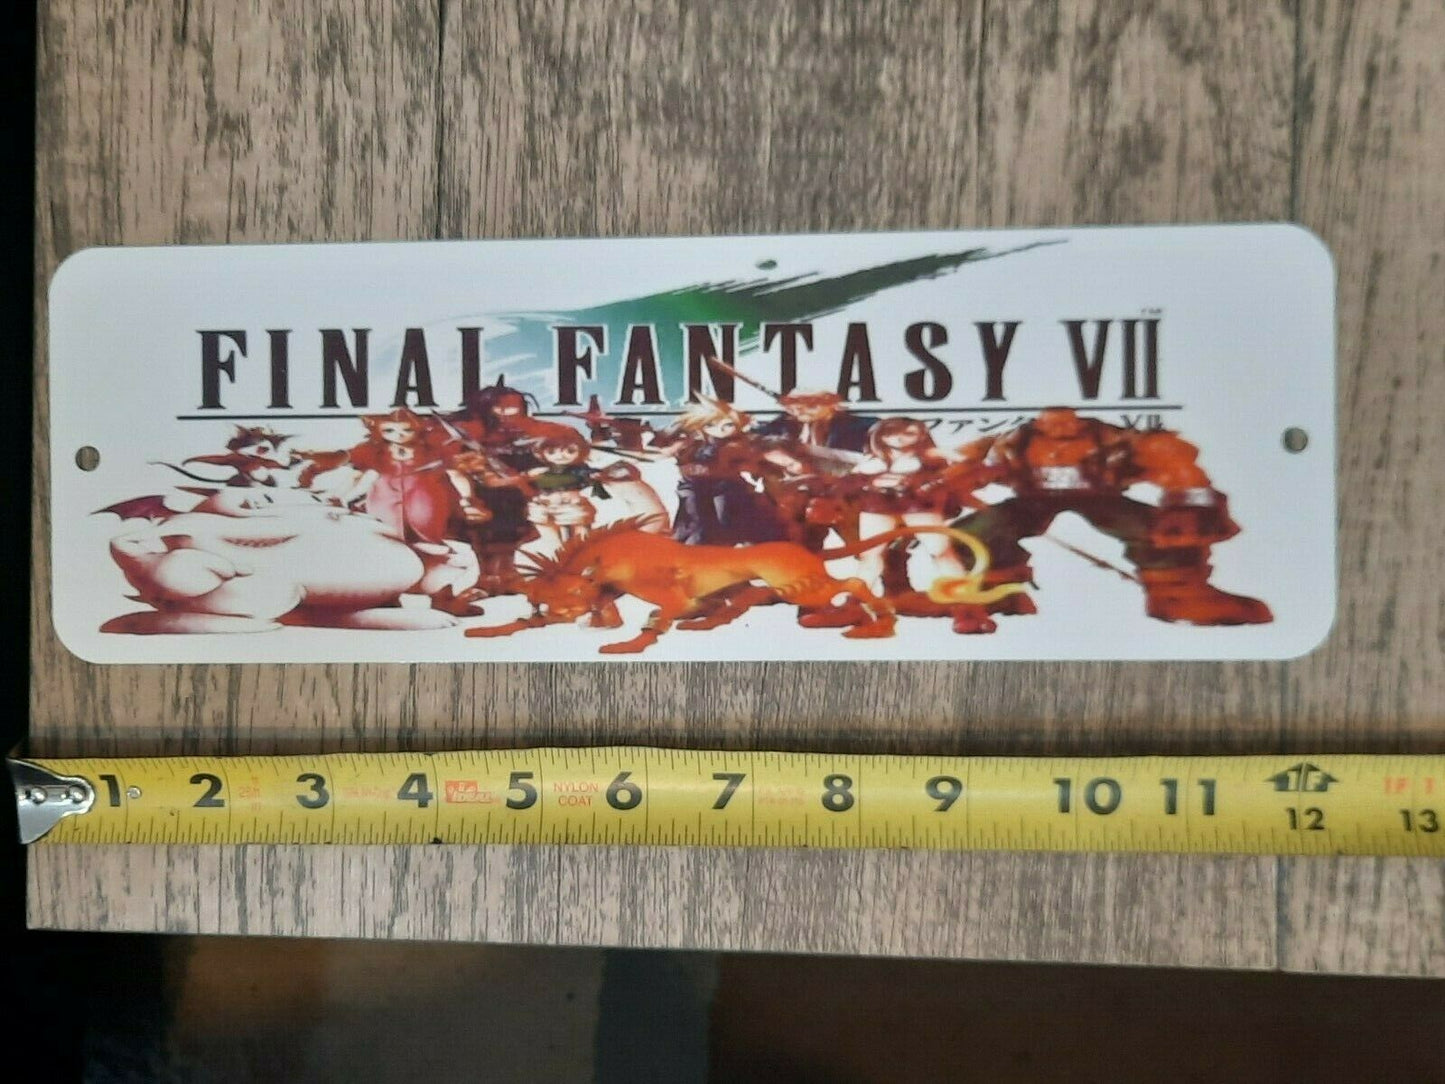 Final Fantasy 7 FFVII  Classic Arcade Marquee Banner 4x12 Metal Wall Sign Video Game